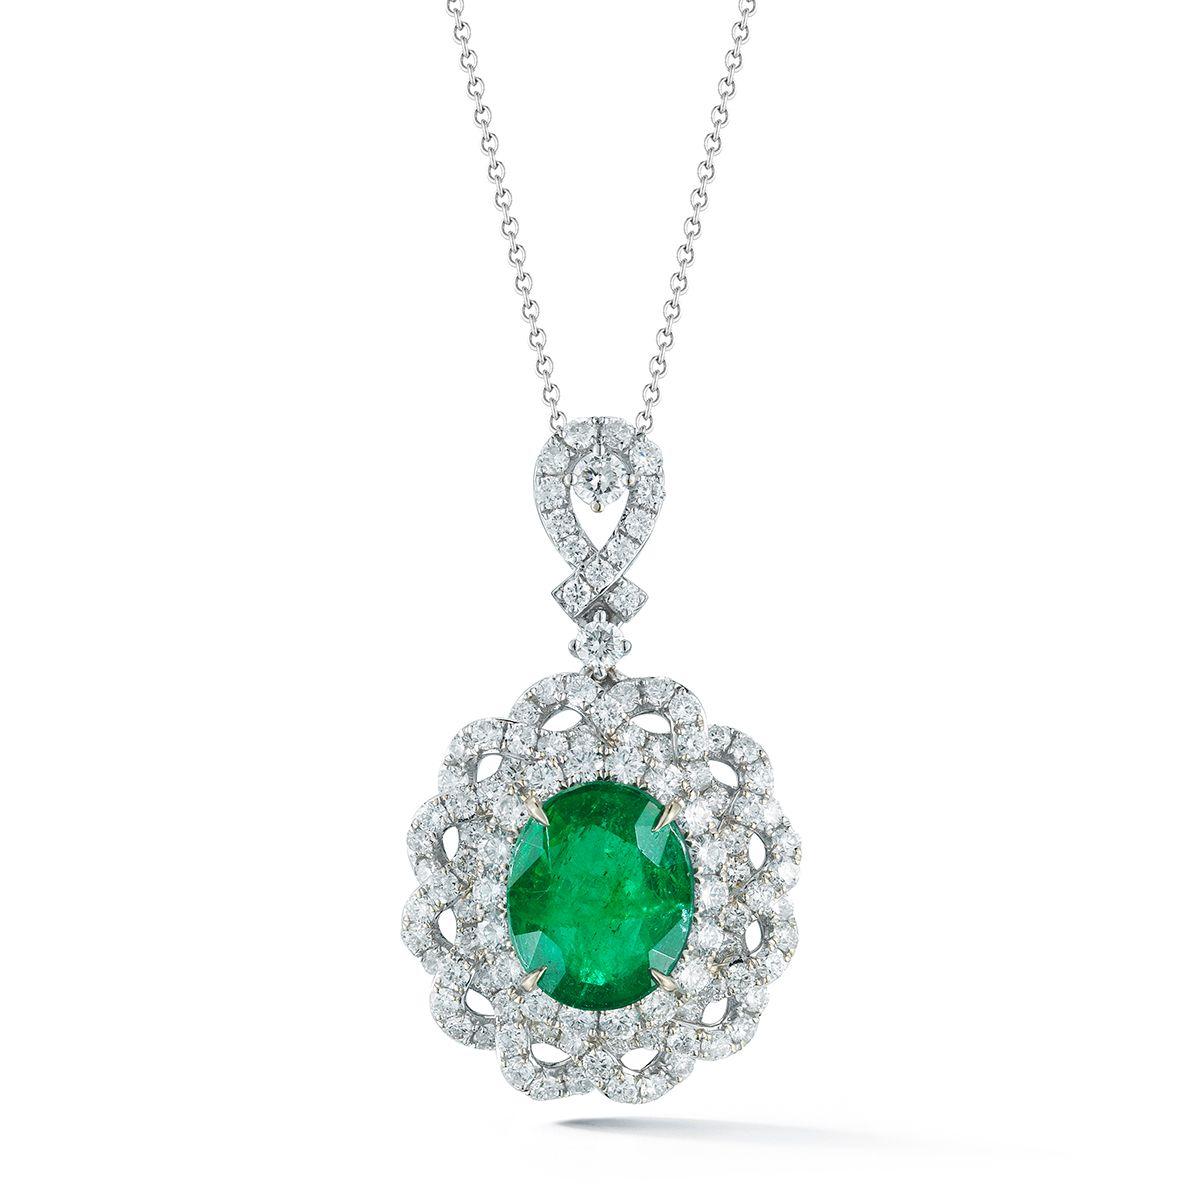 Modern 18k White Gold 3.64ct Emerald and 2.0ct Diamond Pendant For Sale